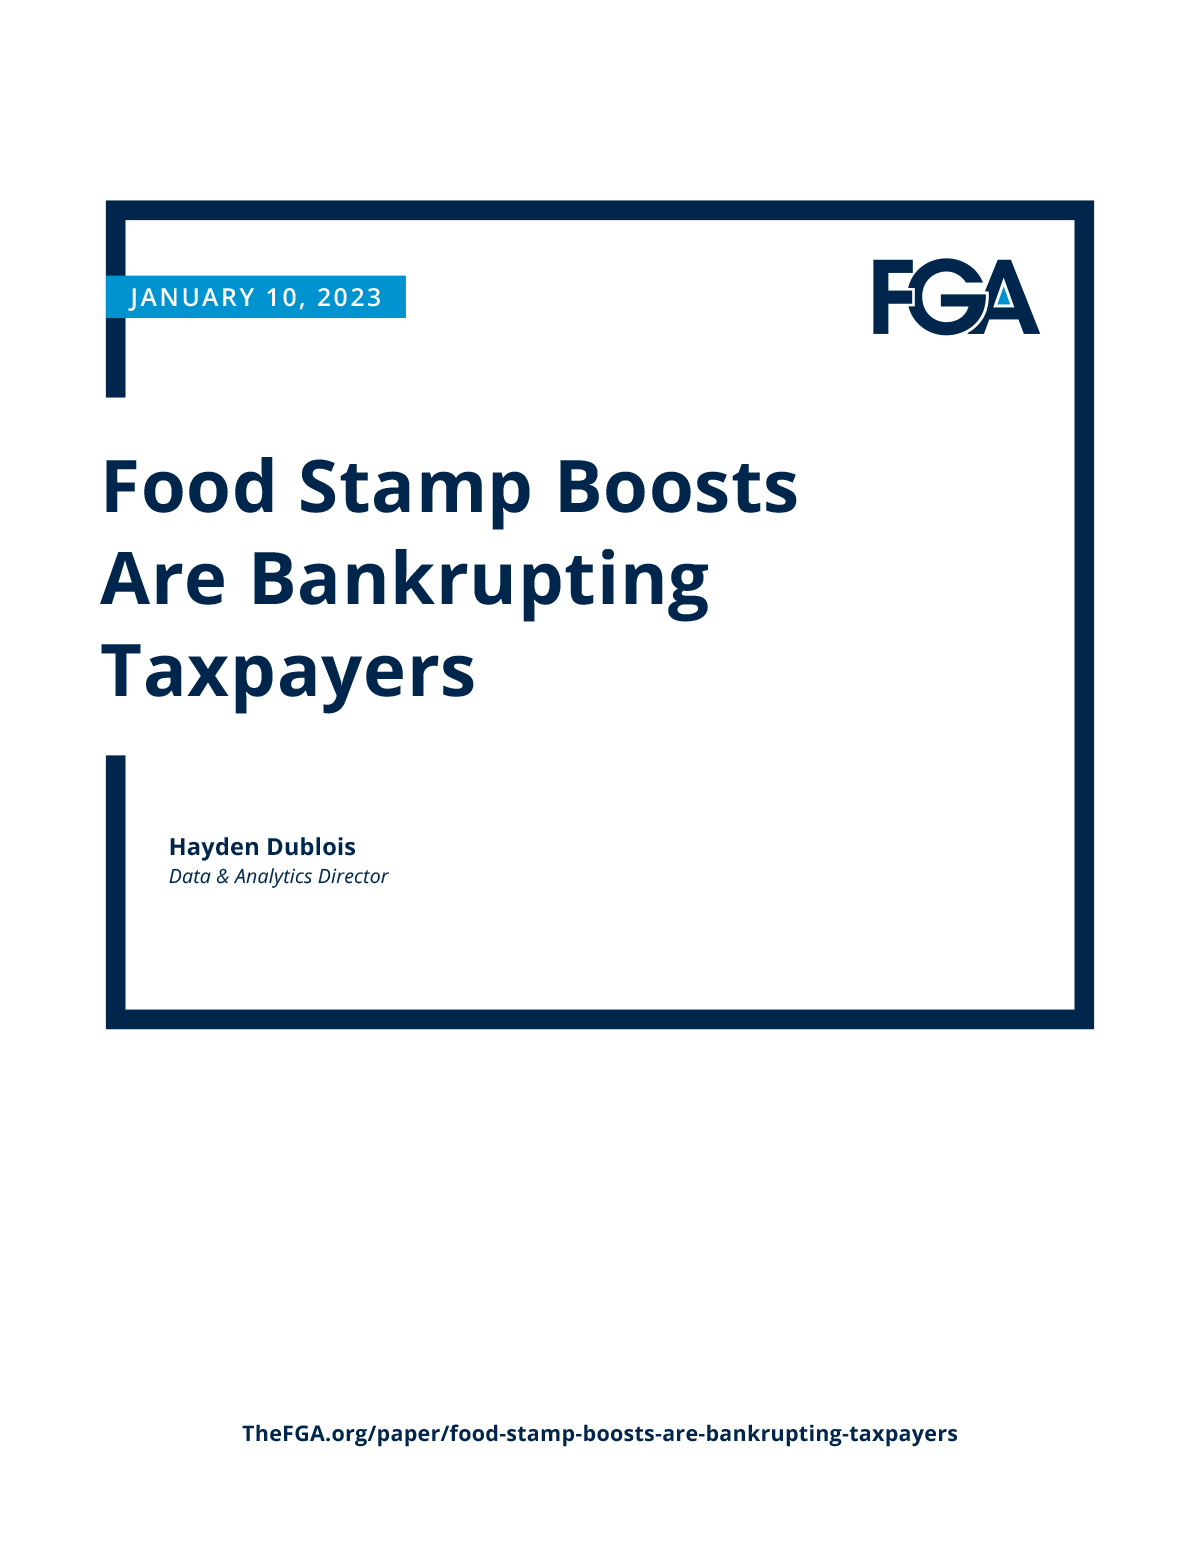 Food Stamp Boosts Are Bankrupting Taxpayers